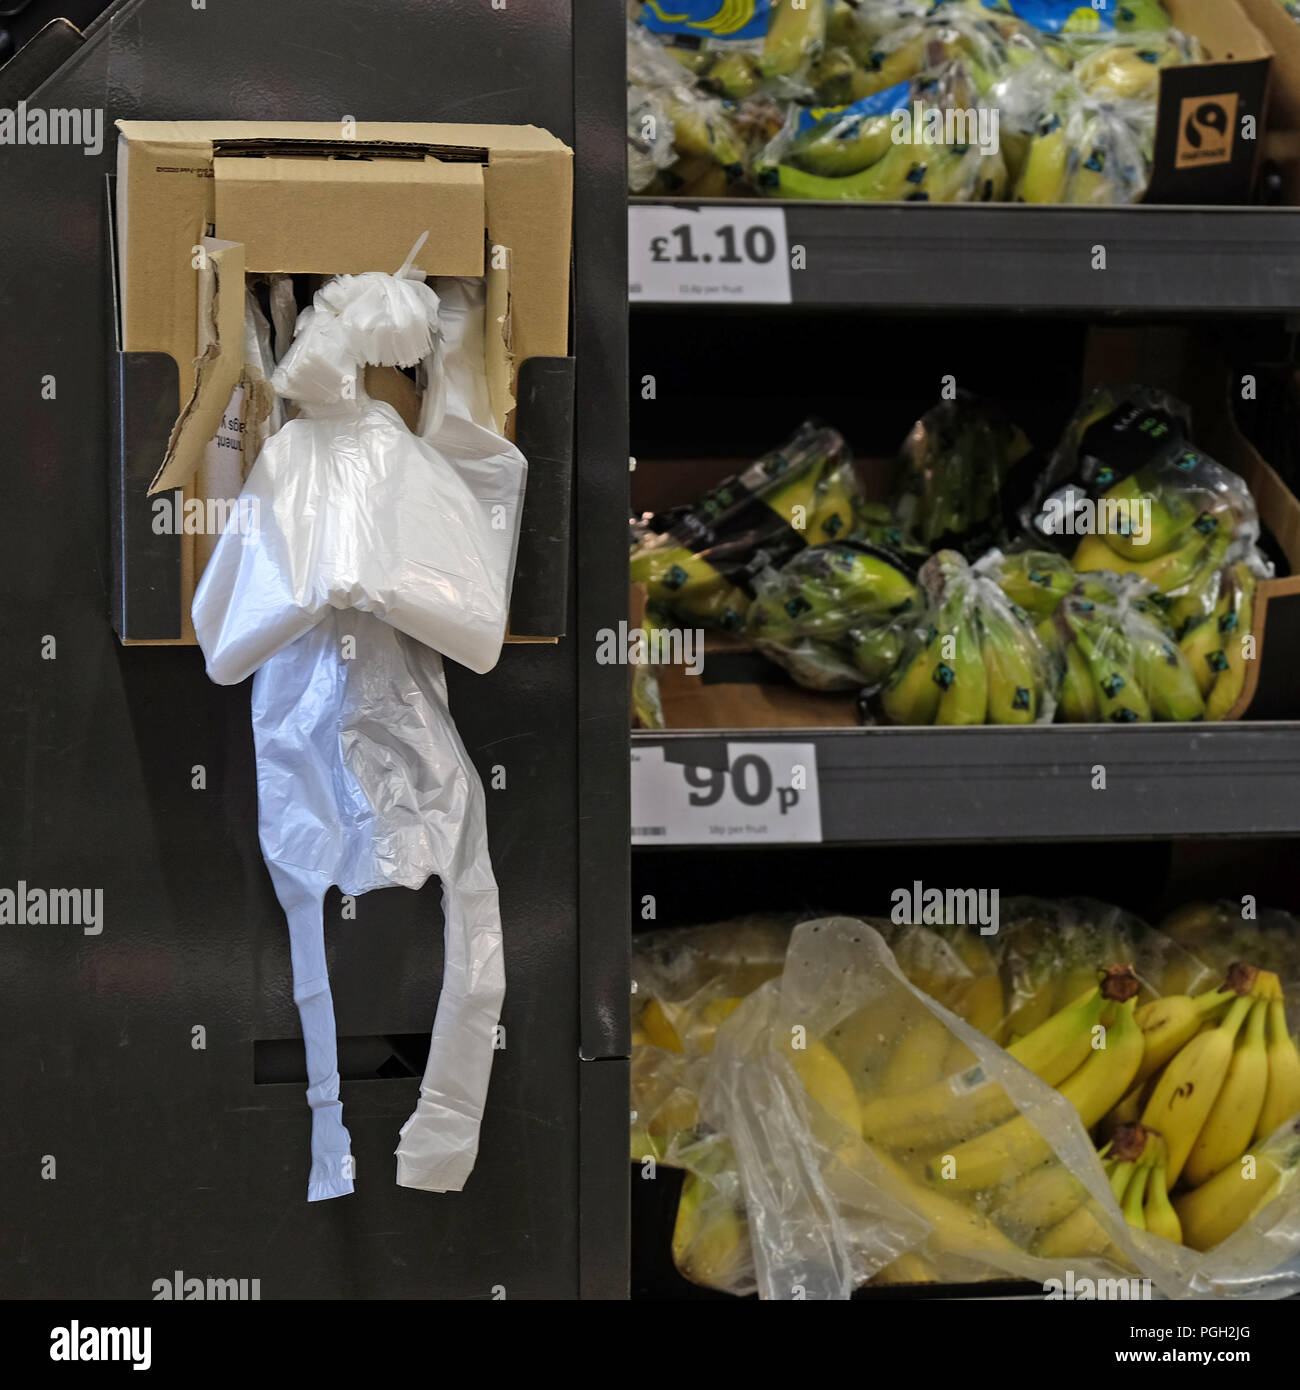 Supermarket plastic bags appear as a figure Stock Photo